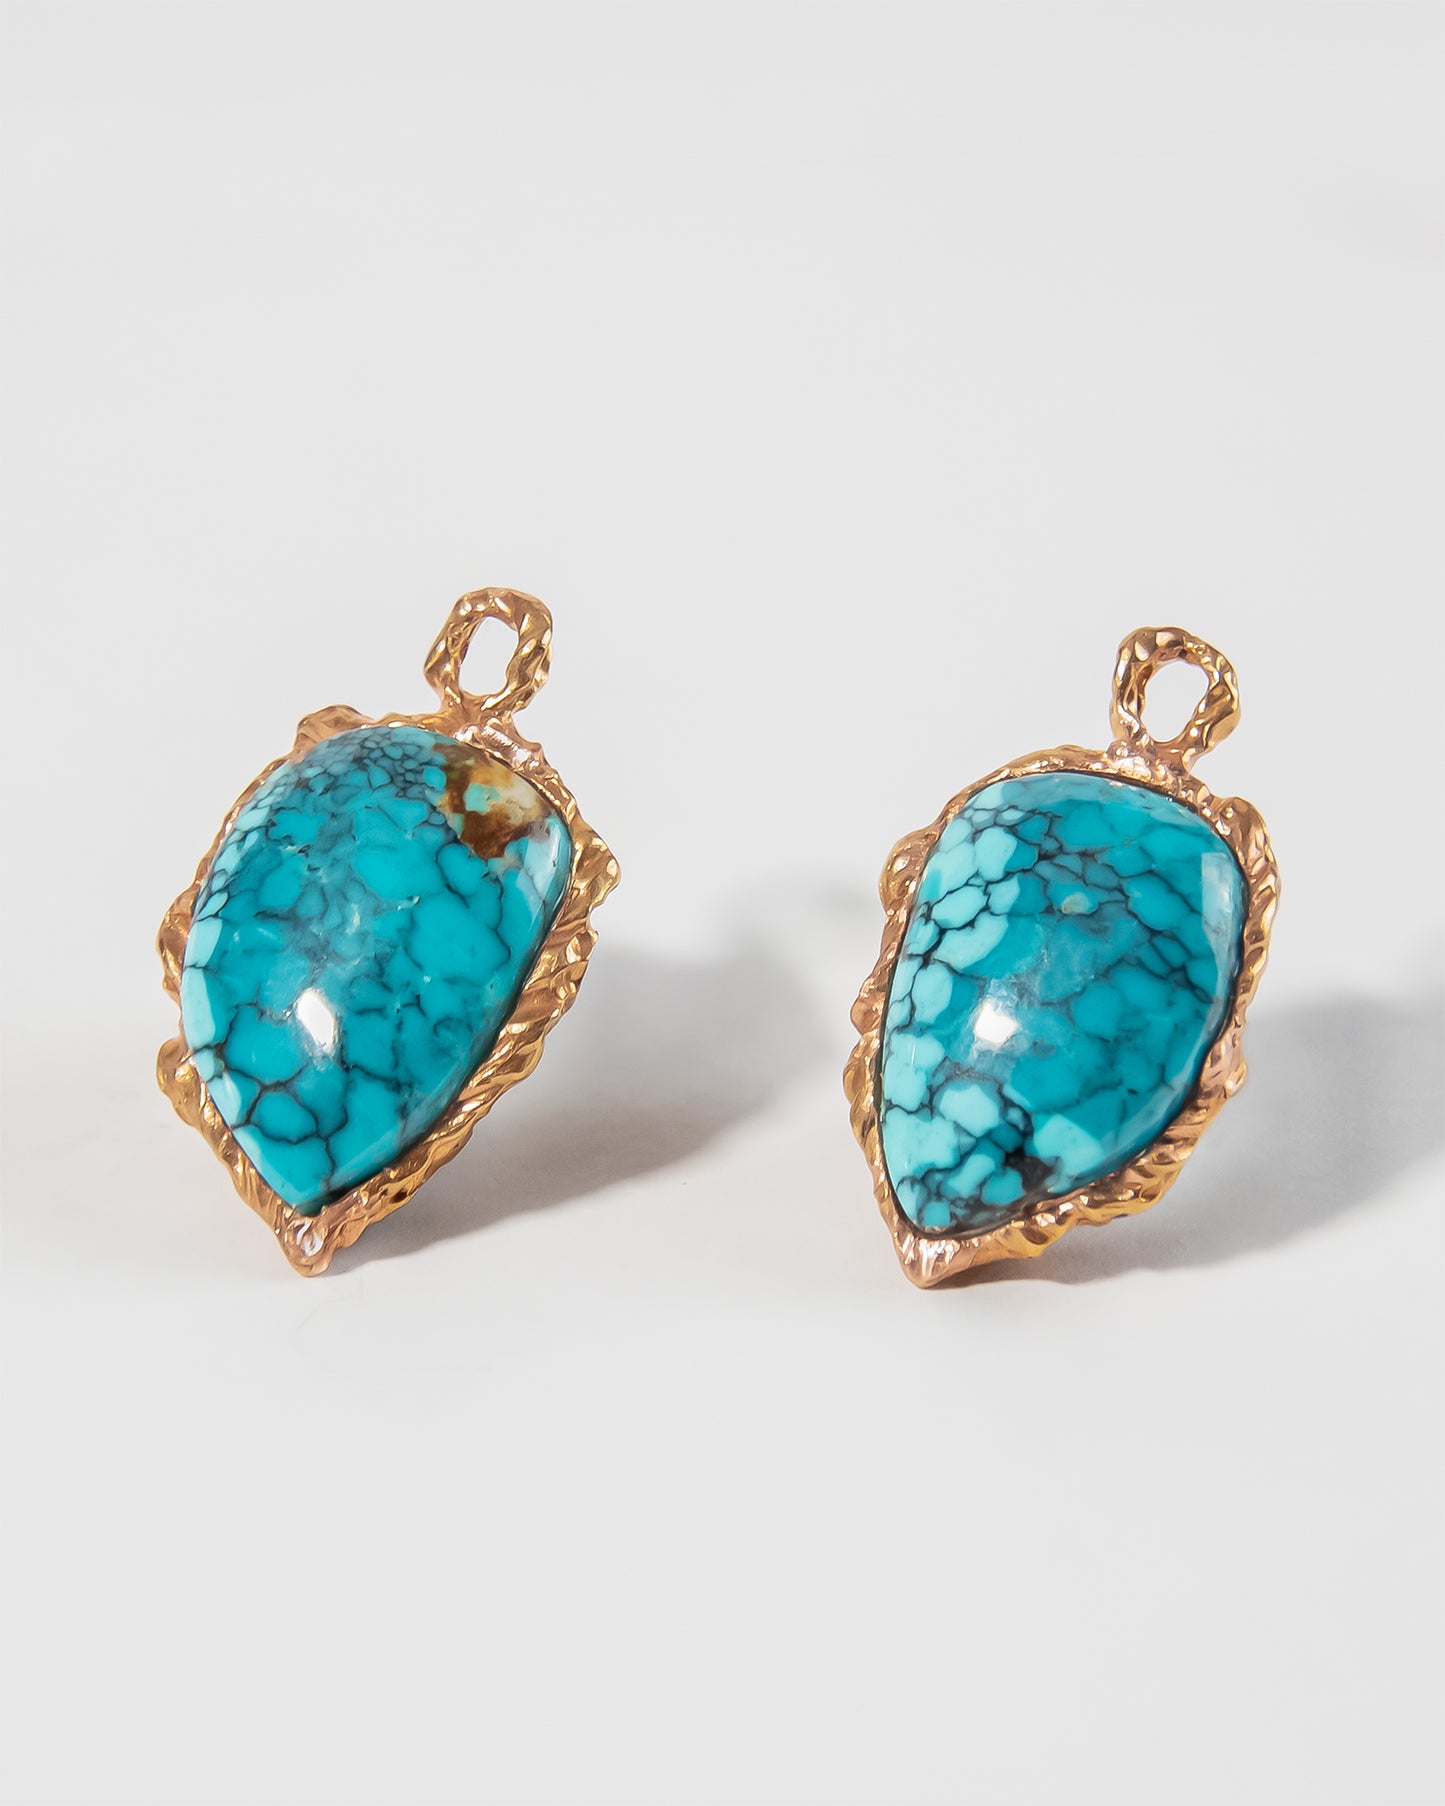 18K Rose Gold detachable drops featuring free-form cabochon Turquoise 